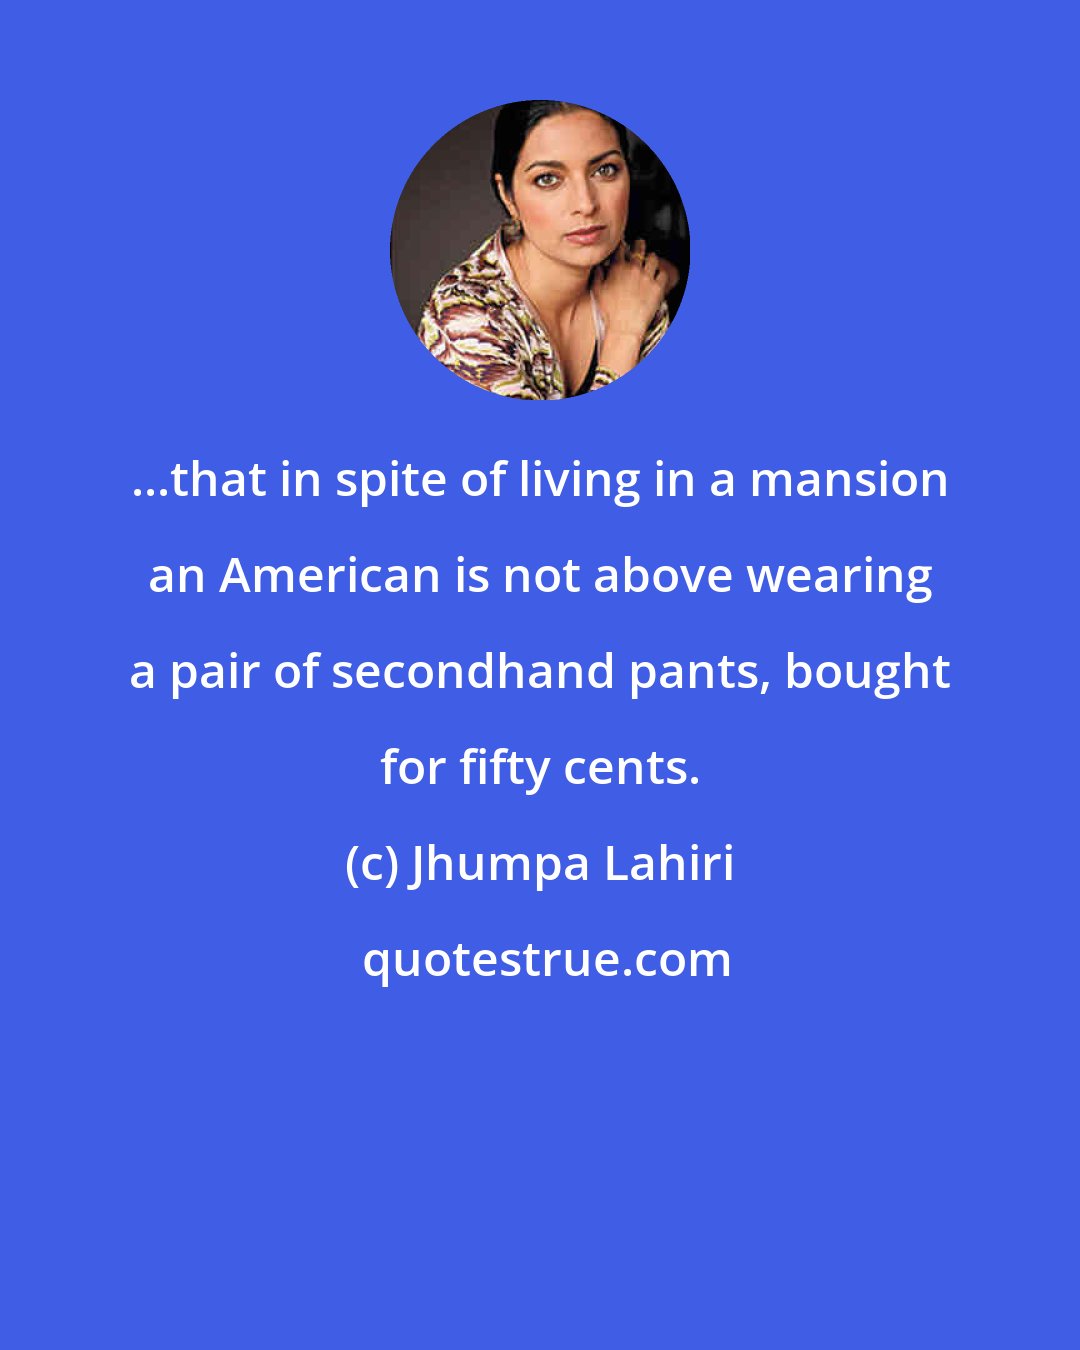 Jhumpa Lahiri: ...that in spite of living in a mansion an American is not above wearing a pair of secondhand pants, bought for fifty cents.